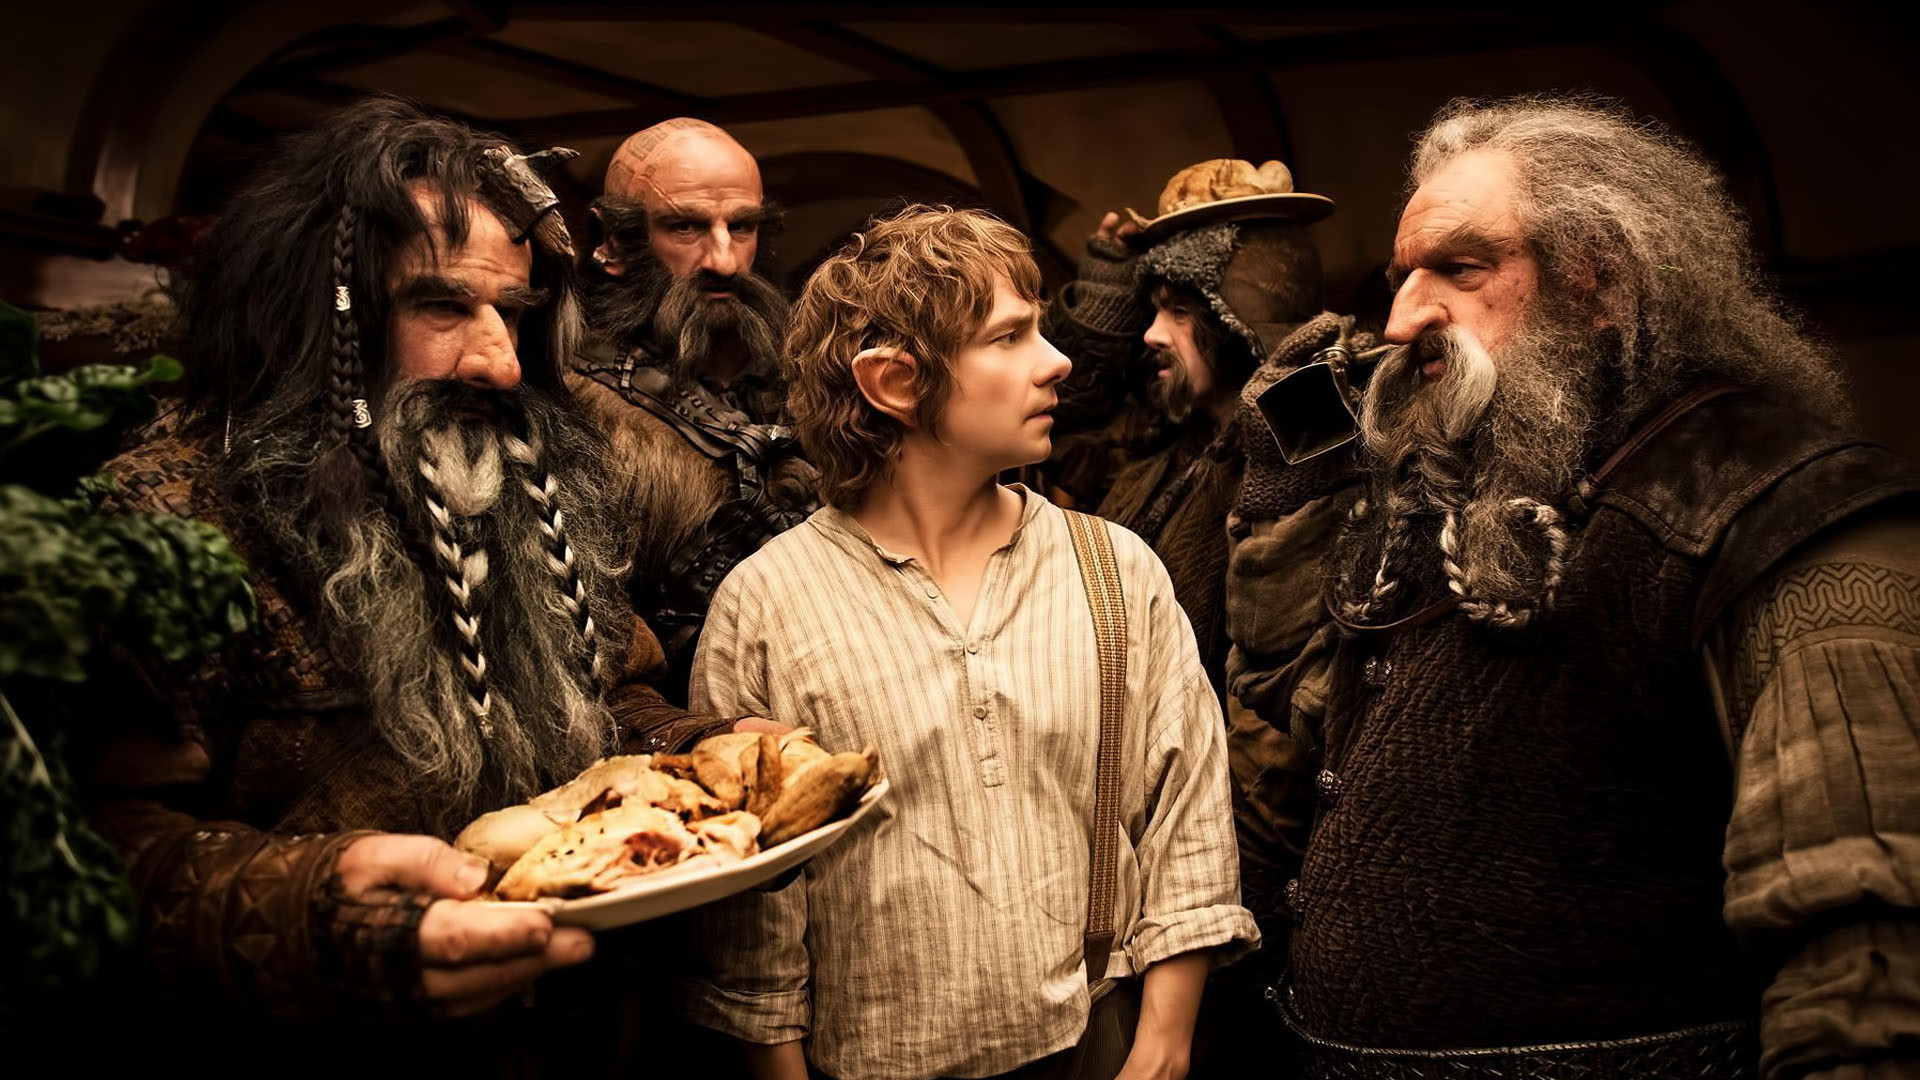 1920x1080 The Hobbit An Unexpected Journeyd Launches Richard Armitage on to 1920Ã1080